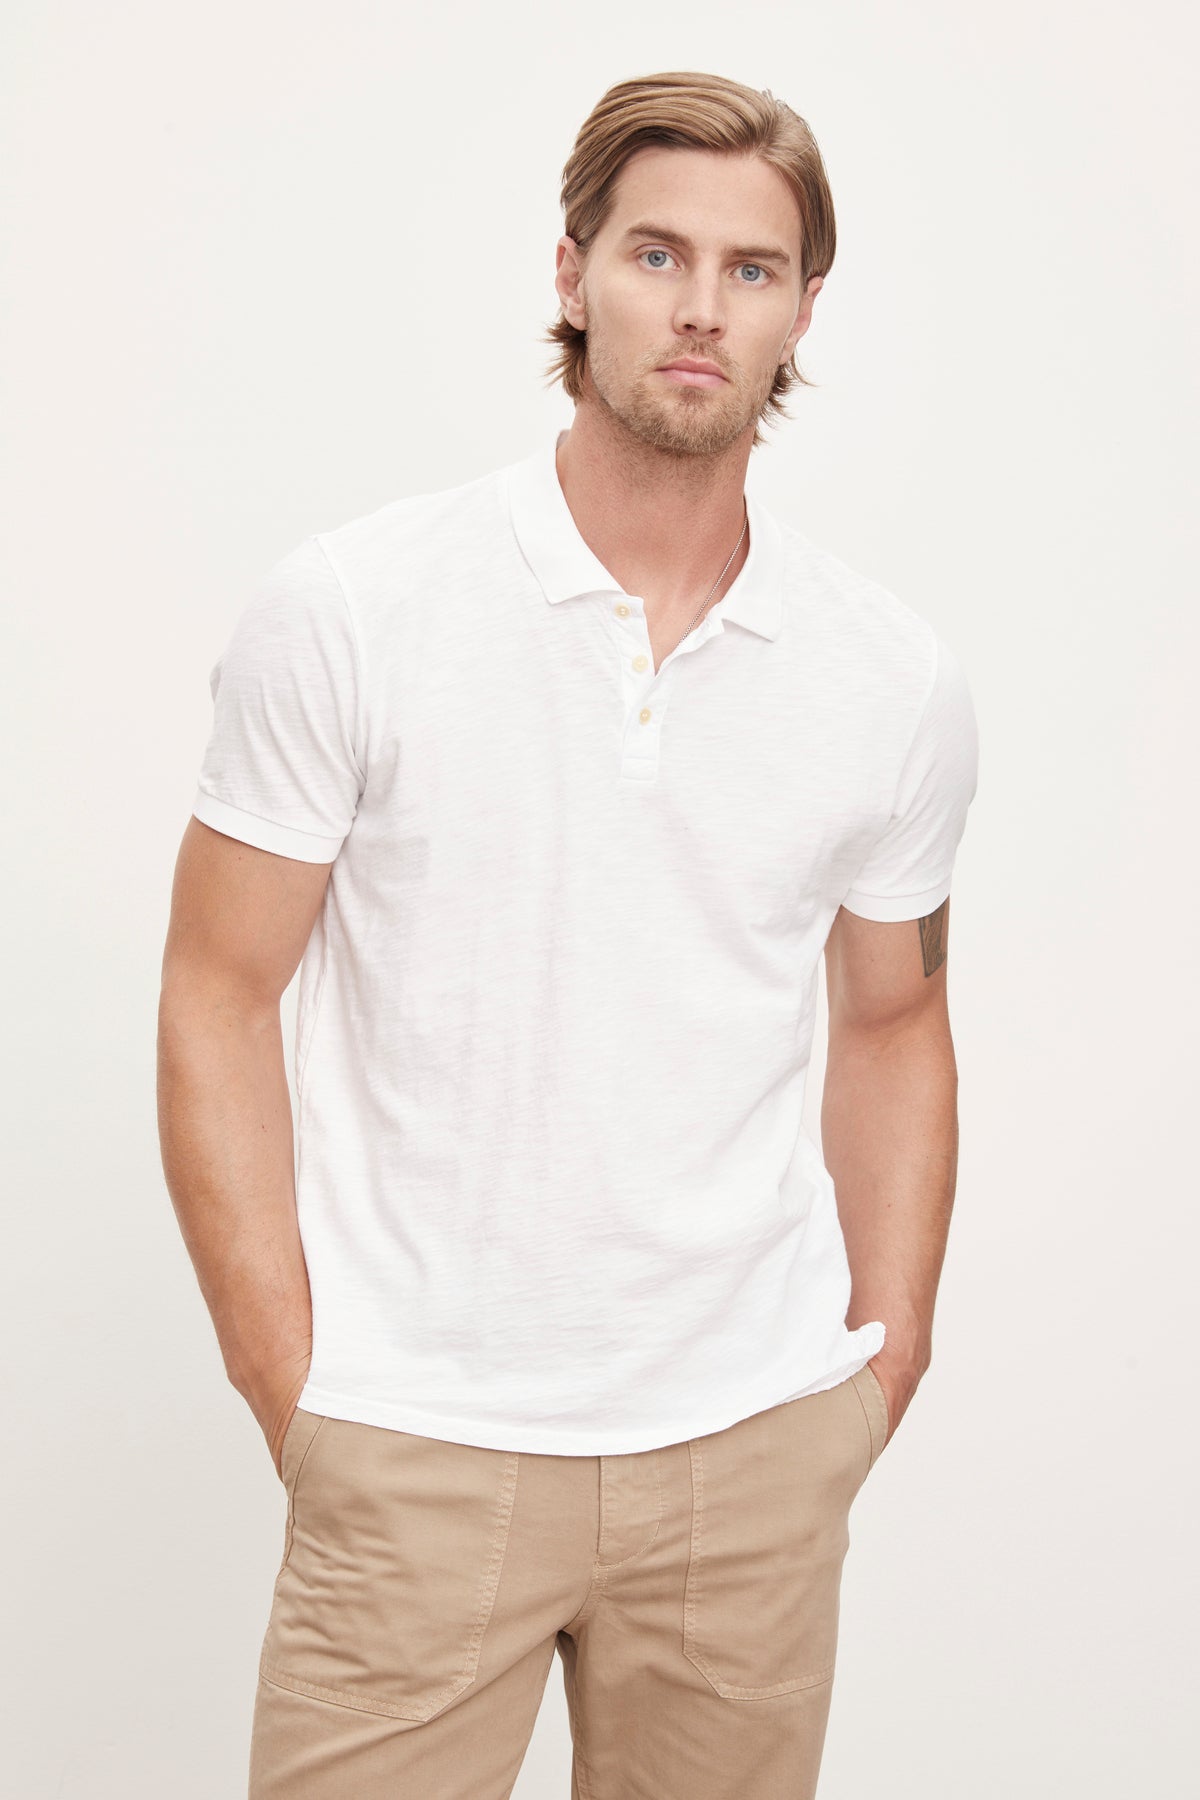 The model is wearing a white NIKO POLO shirt by Velvet by Graham & Spencer with a vintage-feel.-36009424814273